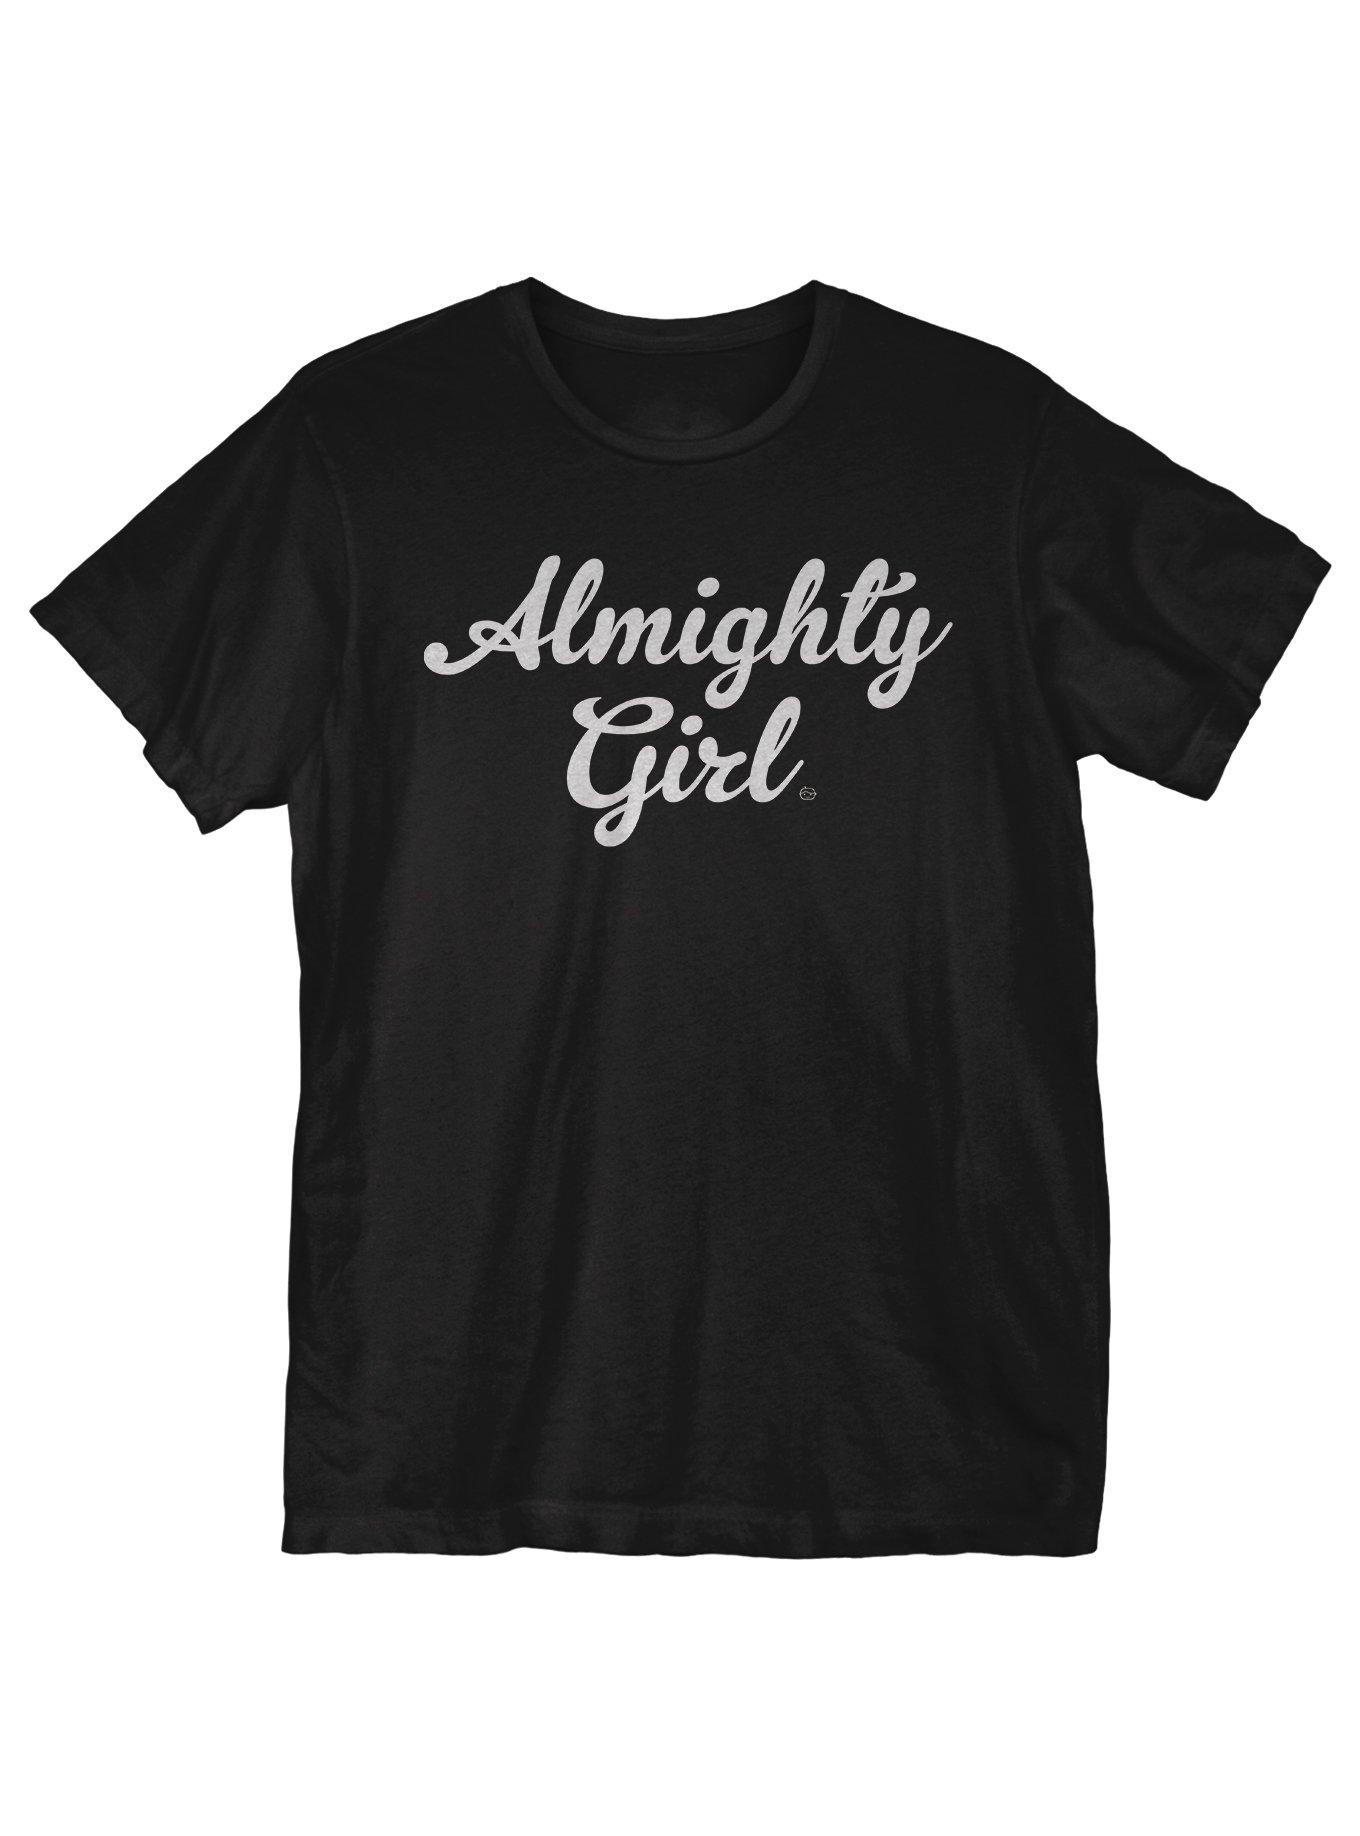 Girl Almighty Black T-shirt -  Canada